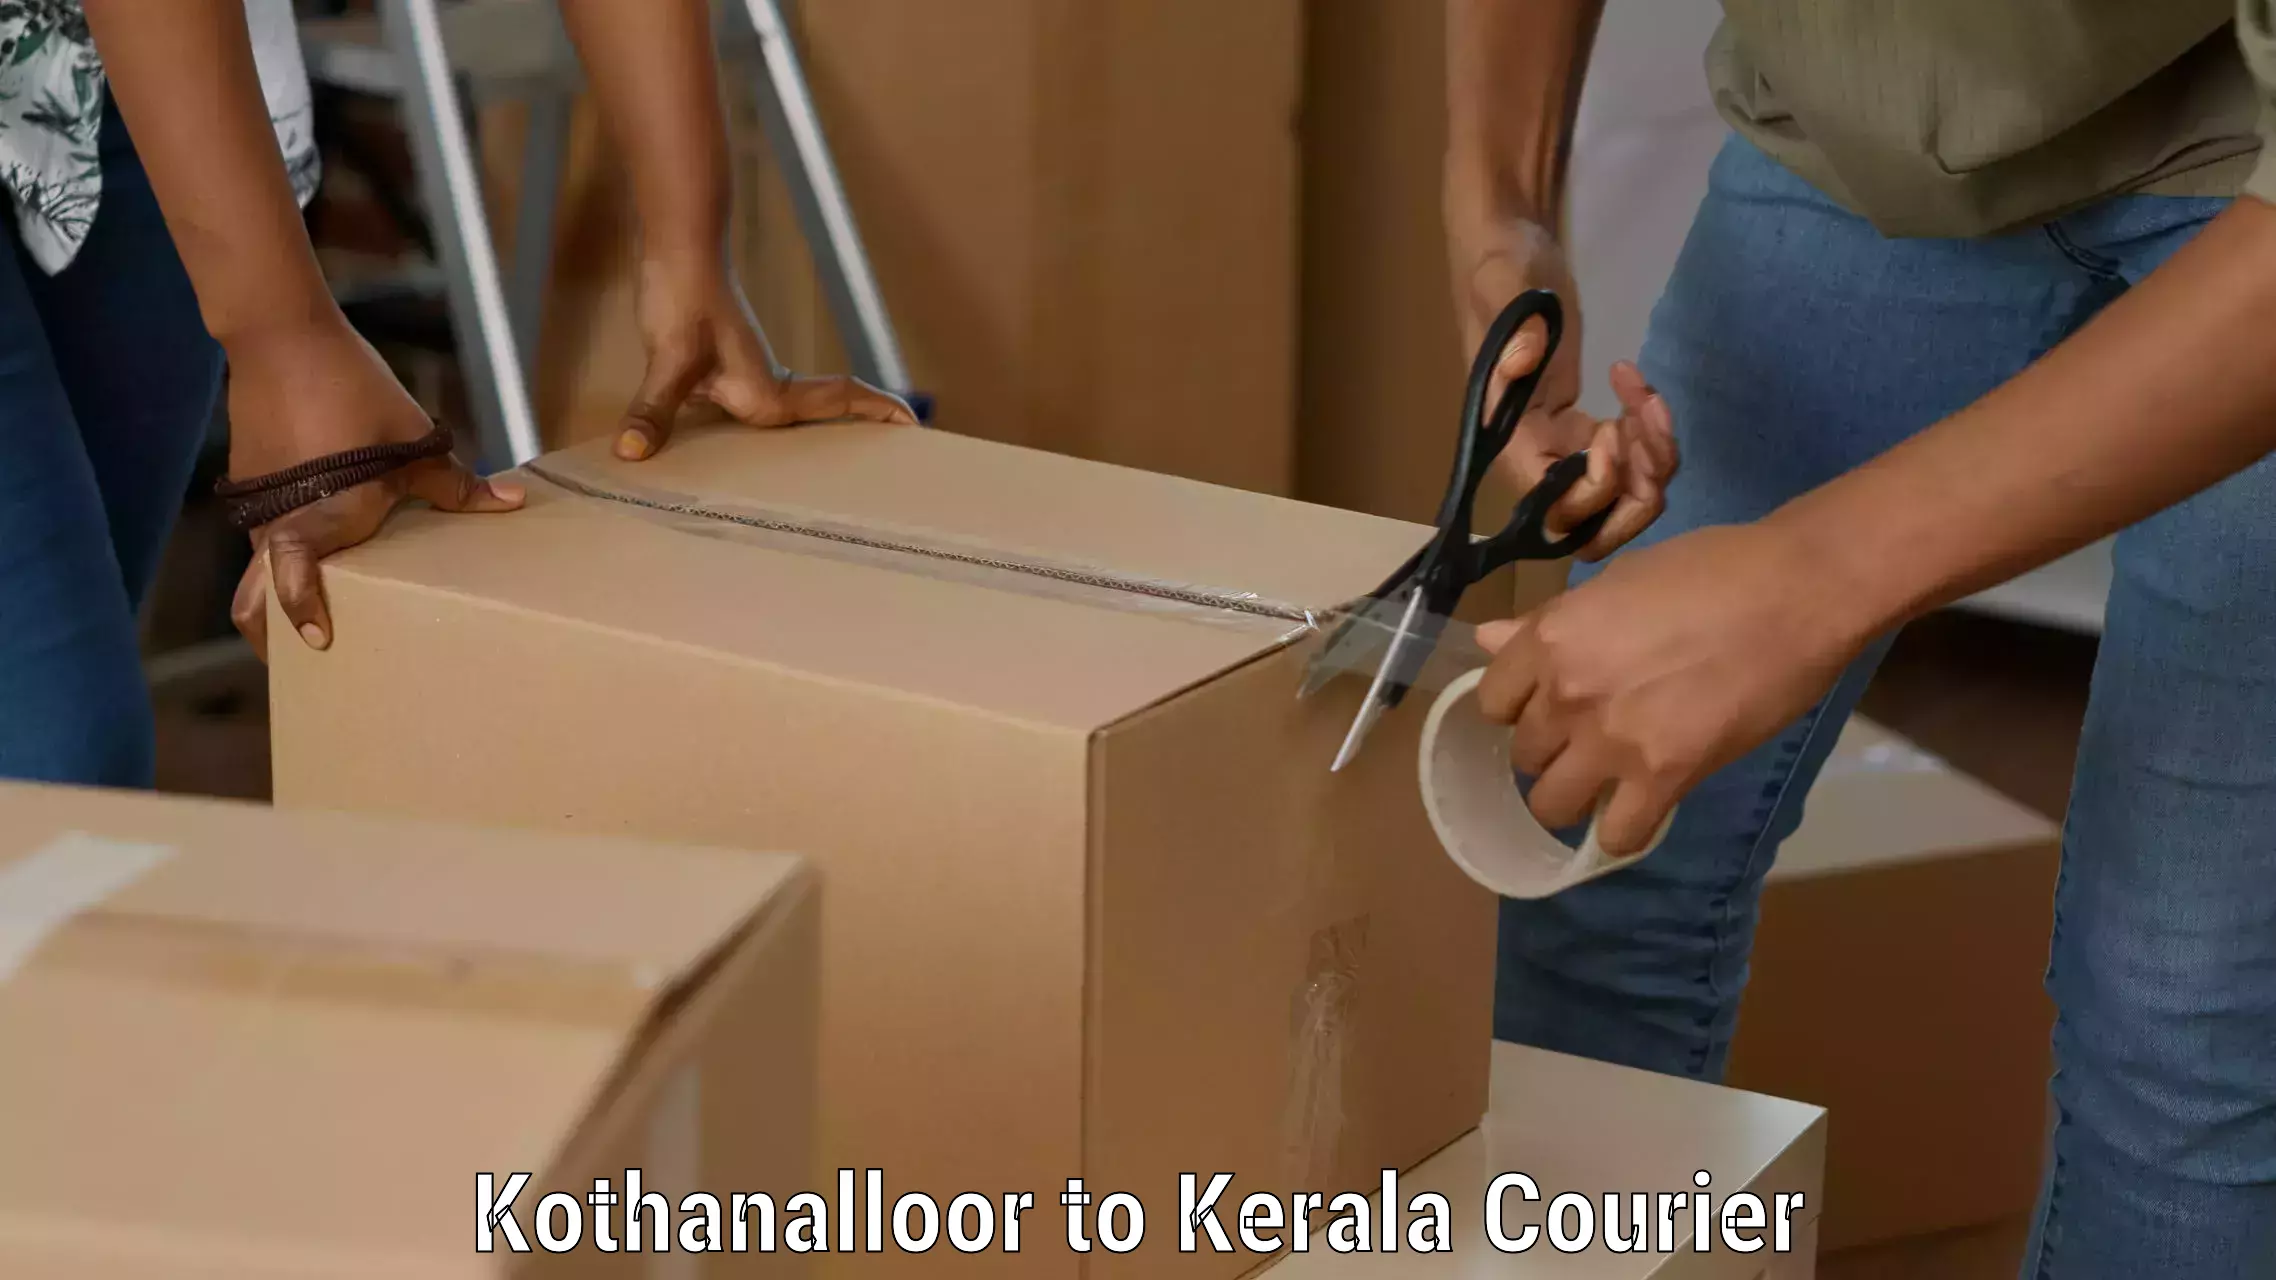 Reliable delivery network Kothanalloor to Kozhencherry